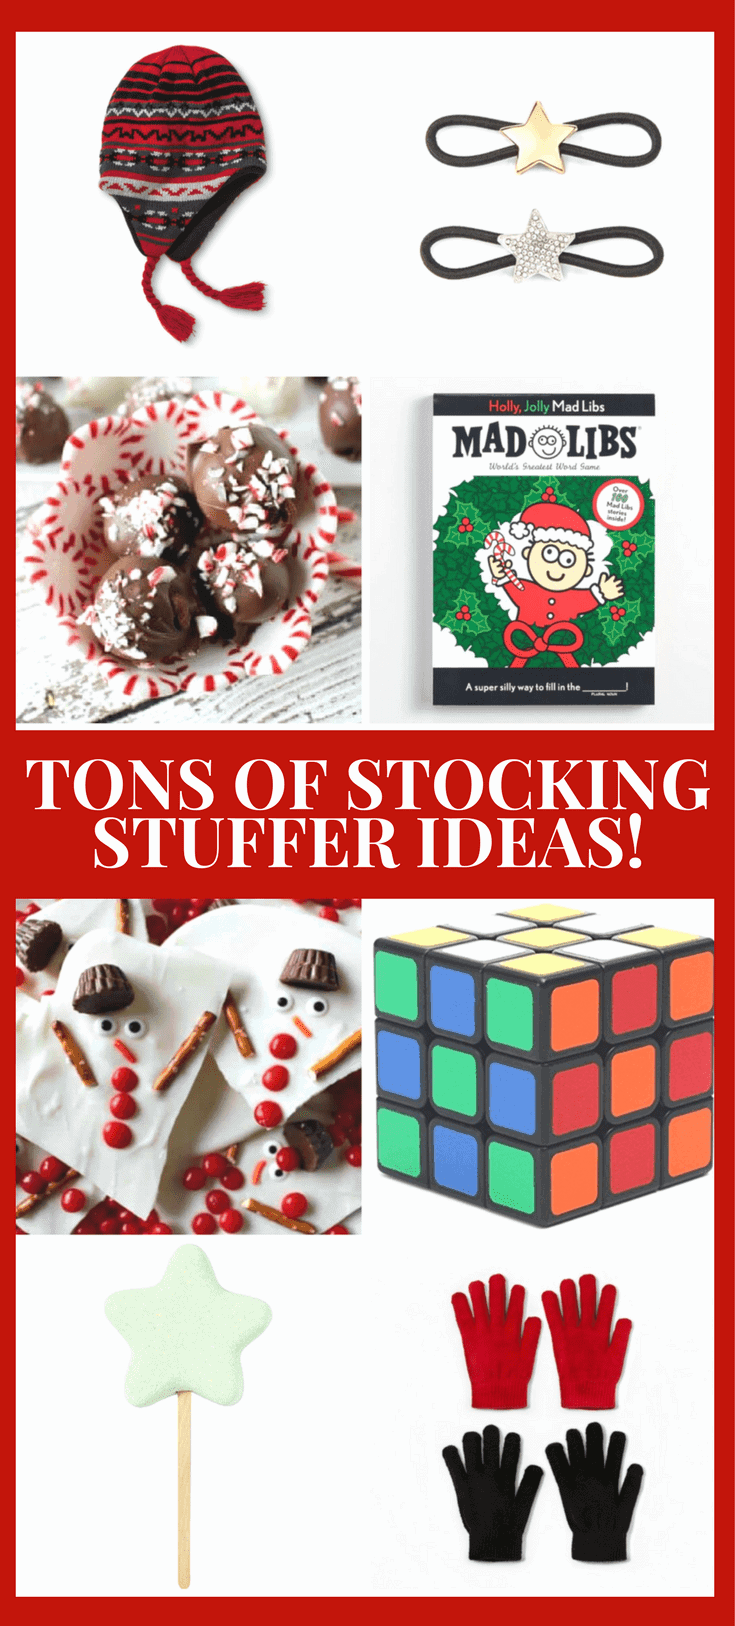 Tons of great ideas for stocking stuffers. So many great small gifts to DIY or Purchase for the stocking this year! 